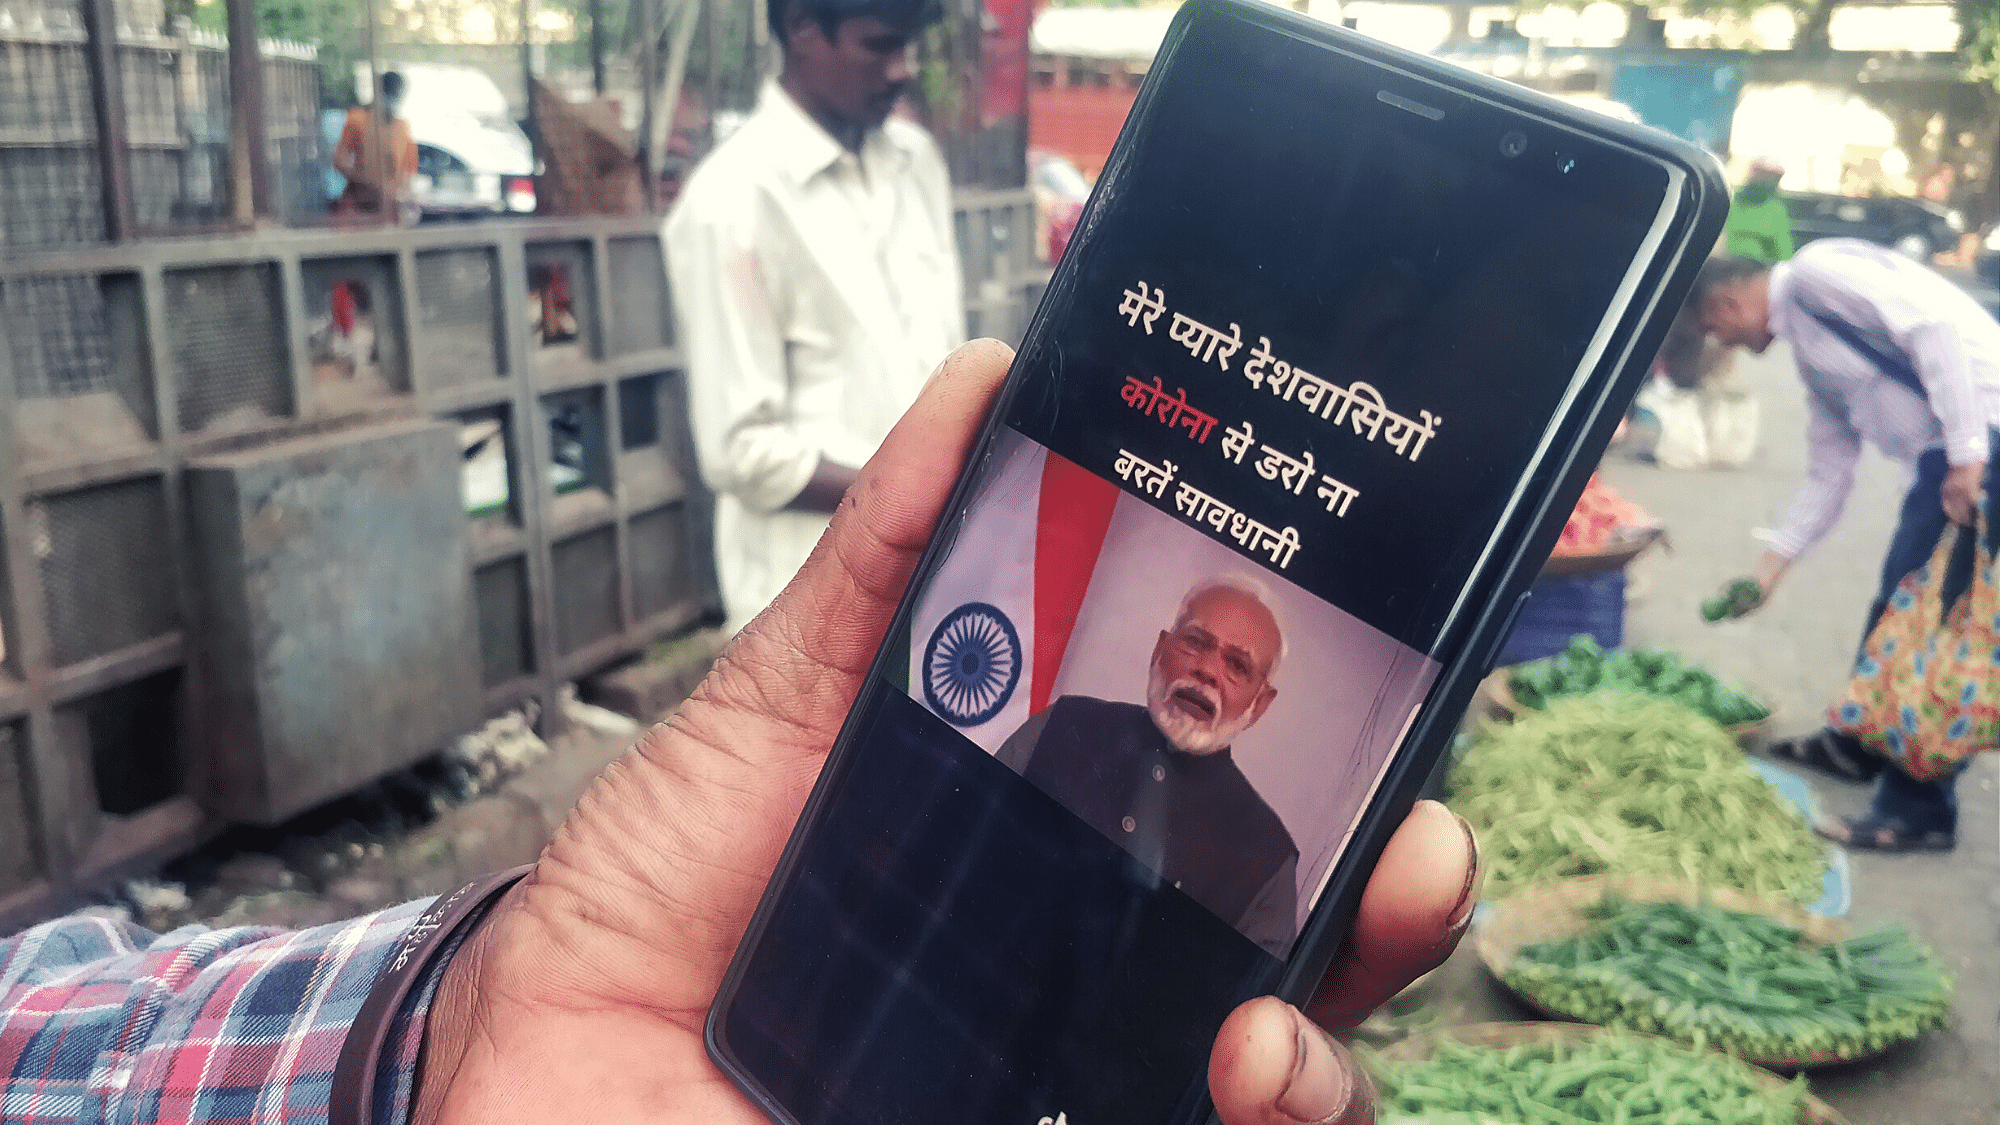 Monu shows a video on his mobile phone, of Prime Minister Modi speaking about coronavirus.